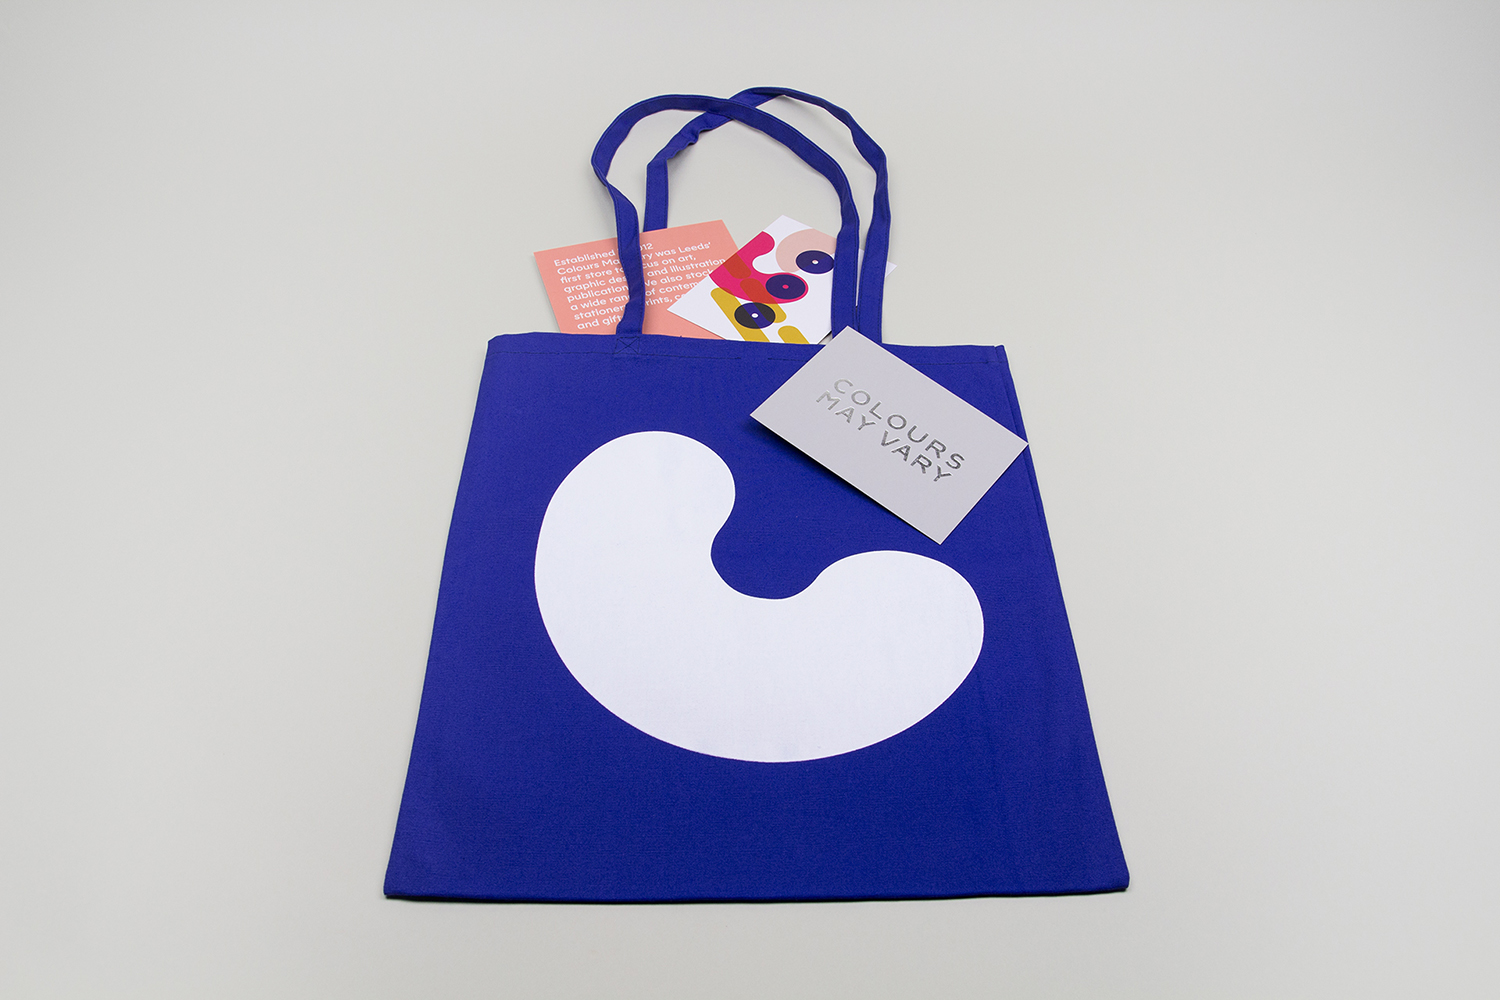 Graphic identity and tote bag by Build for Leeds based creative lifestyle store, independent bookshop and events space